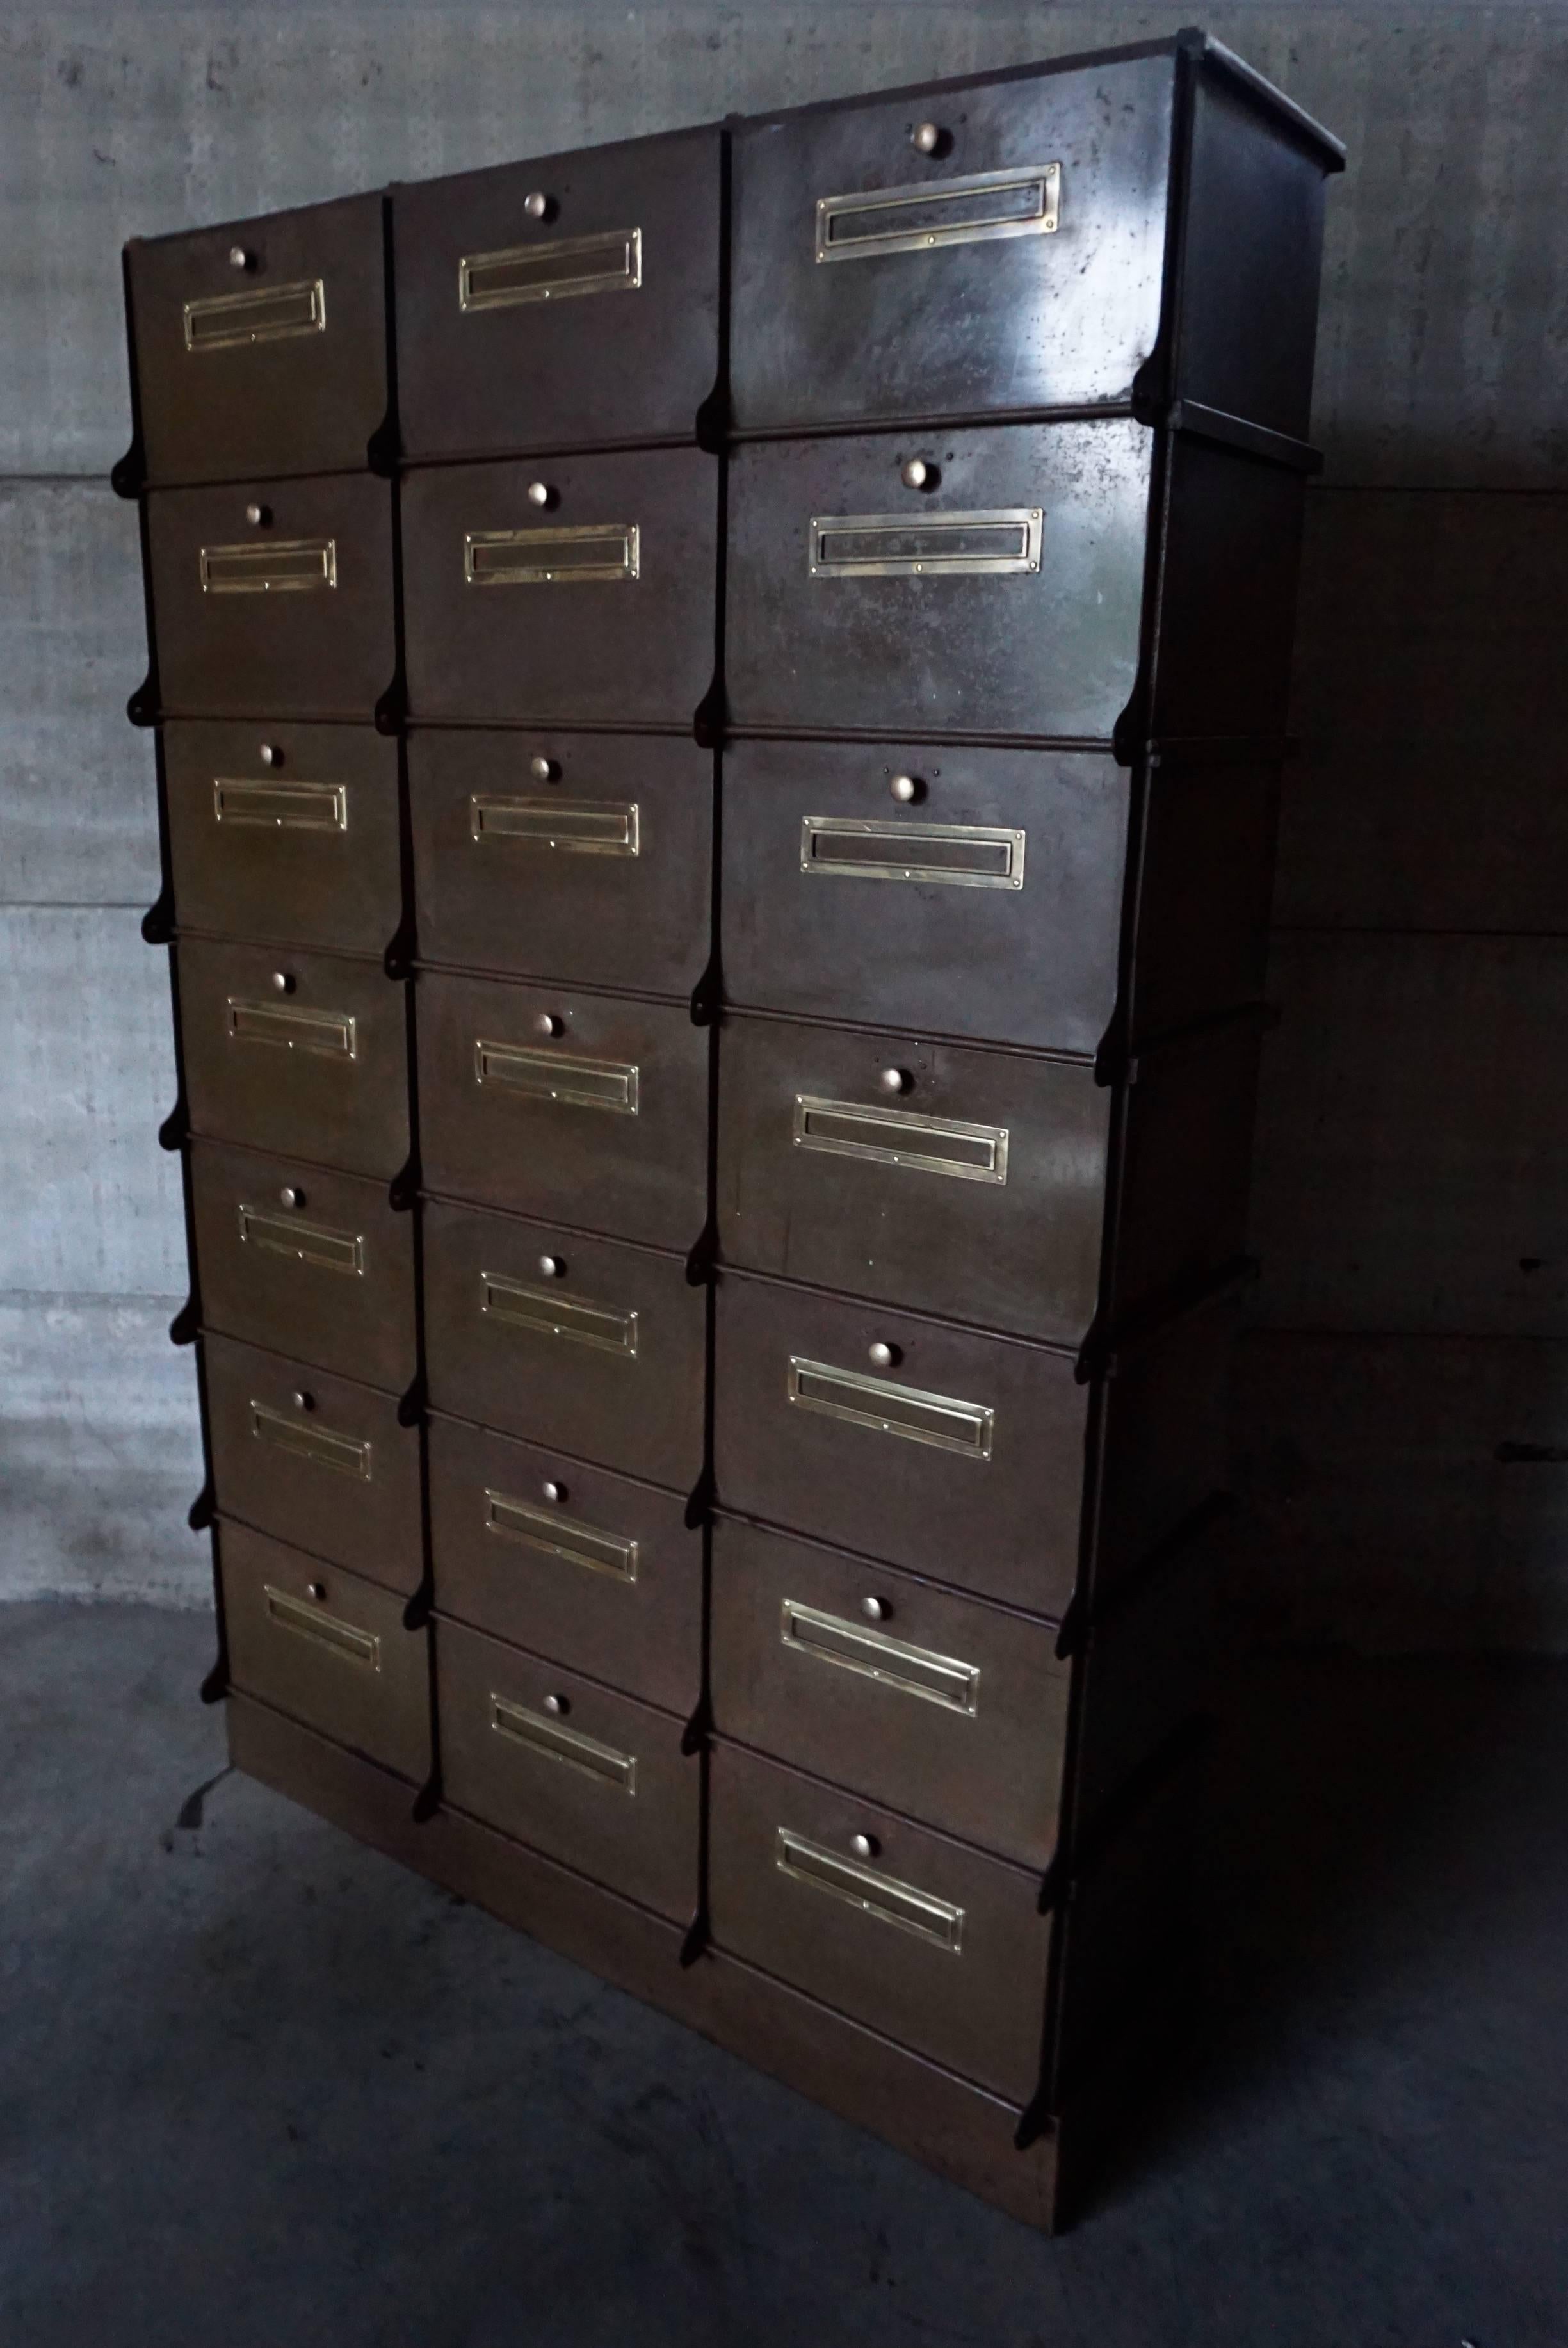 This industrial filing cabinet was manufactured in Belgium by Ribeauville during the 1930s. It is made from metal, featuring 21 compartments with brass details. The cabinet has been professionally restored and is in a very good vintage condition. 
